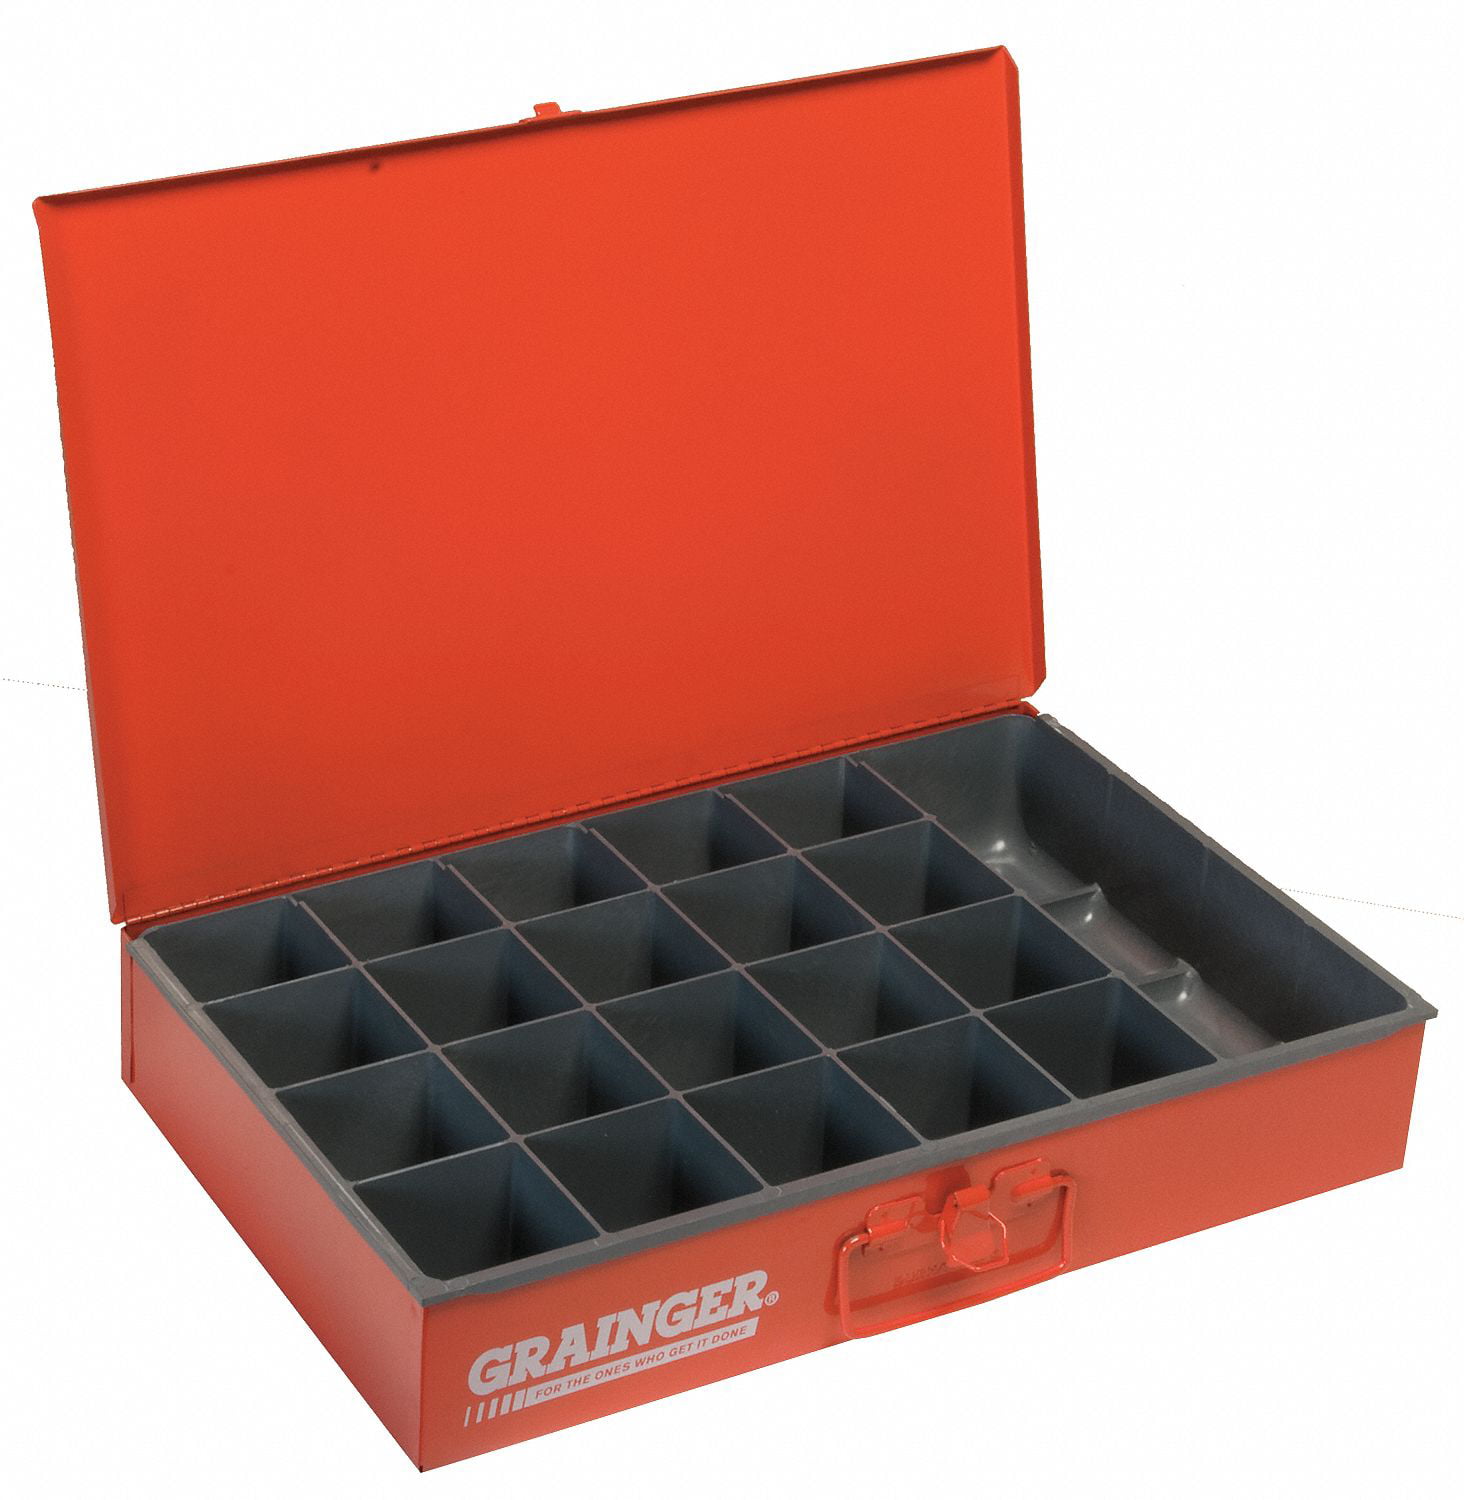 DURHAM MFG Drawer,16 Compartments,Gray 113-95-D567 Gray 